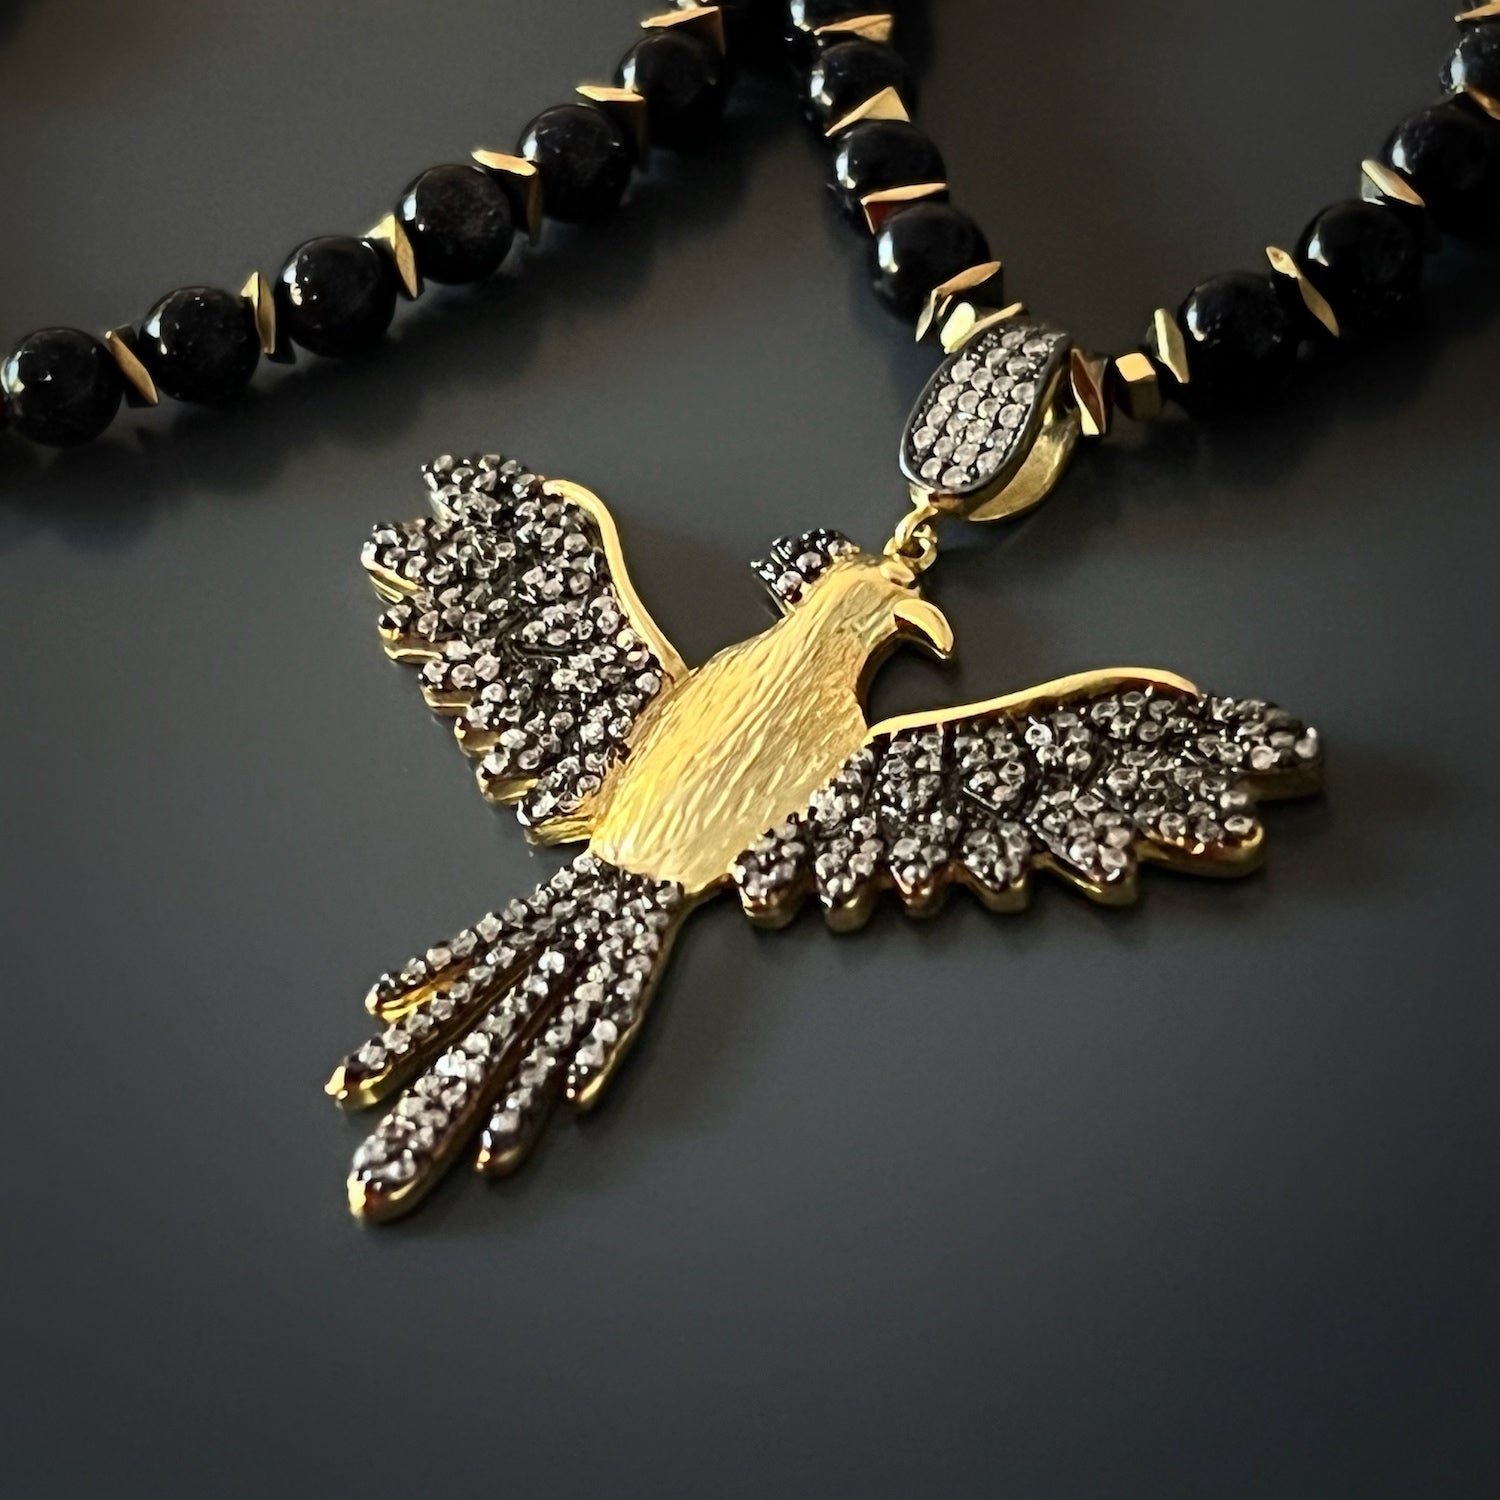 The Magical Phoenix Bird Necklace: A symbol of transformation and resilience, capturing the essence of the mythical phoenix in a stunning design.